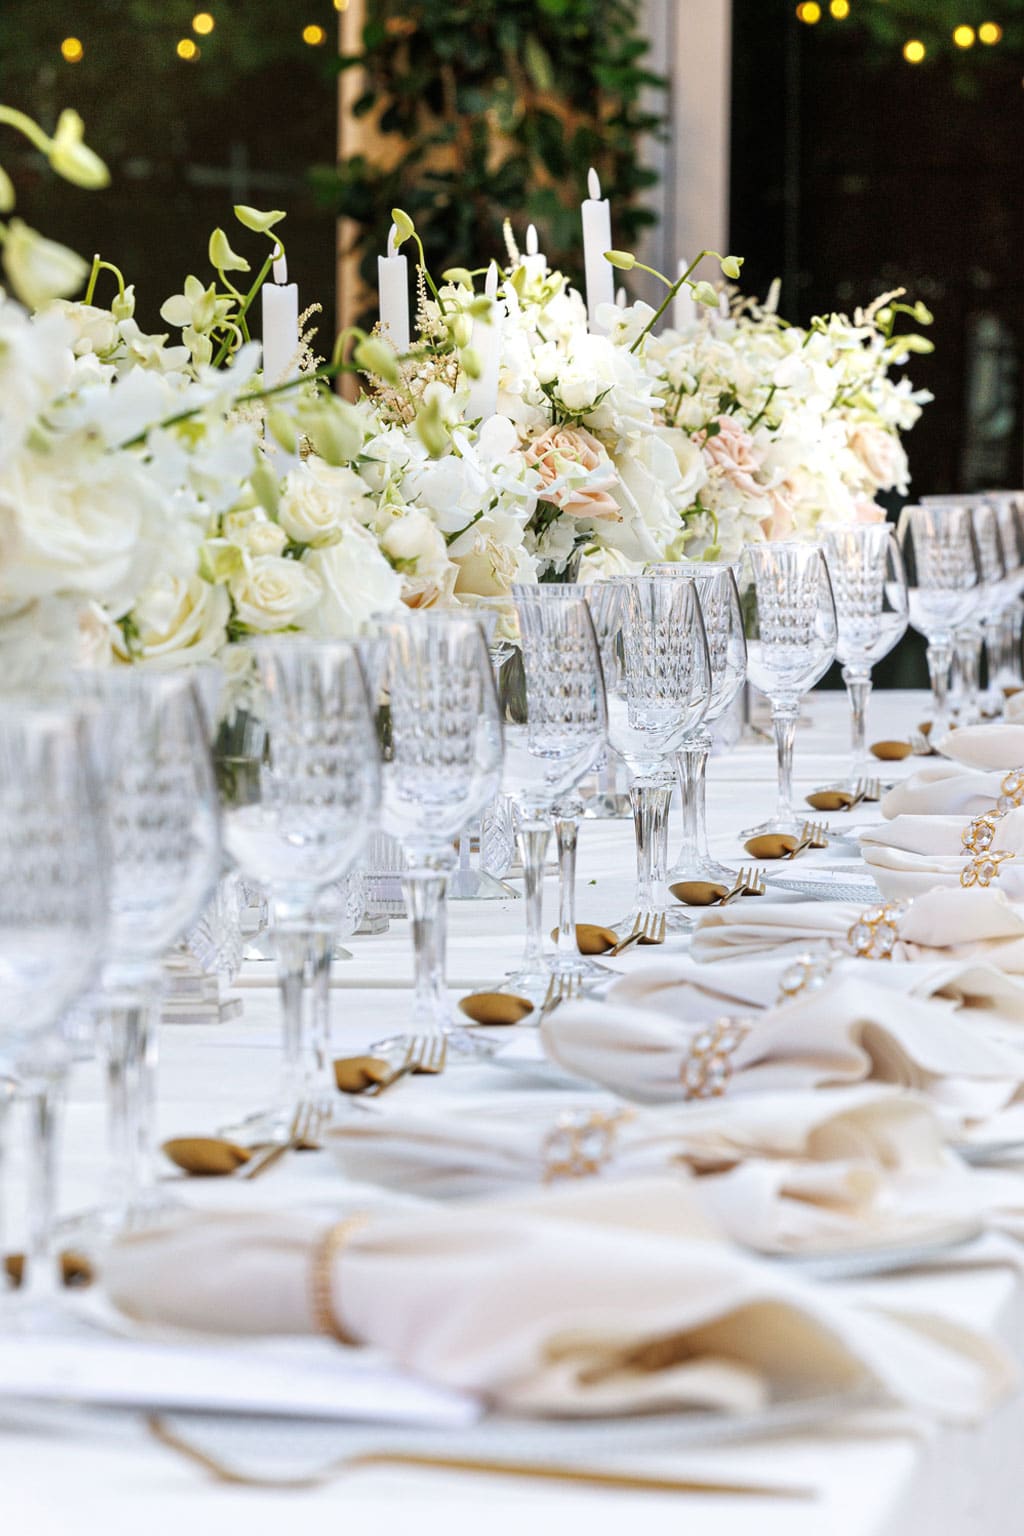 Exquisite Tabletop | Reception table with clear crystal glassware